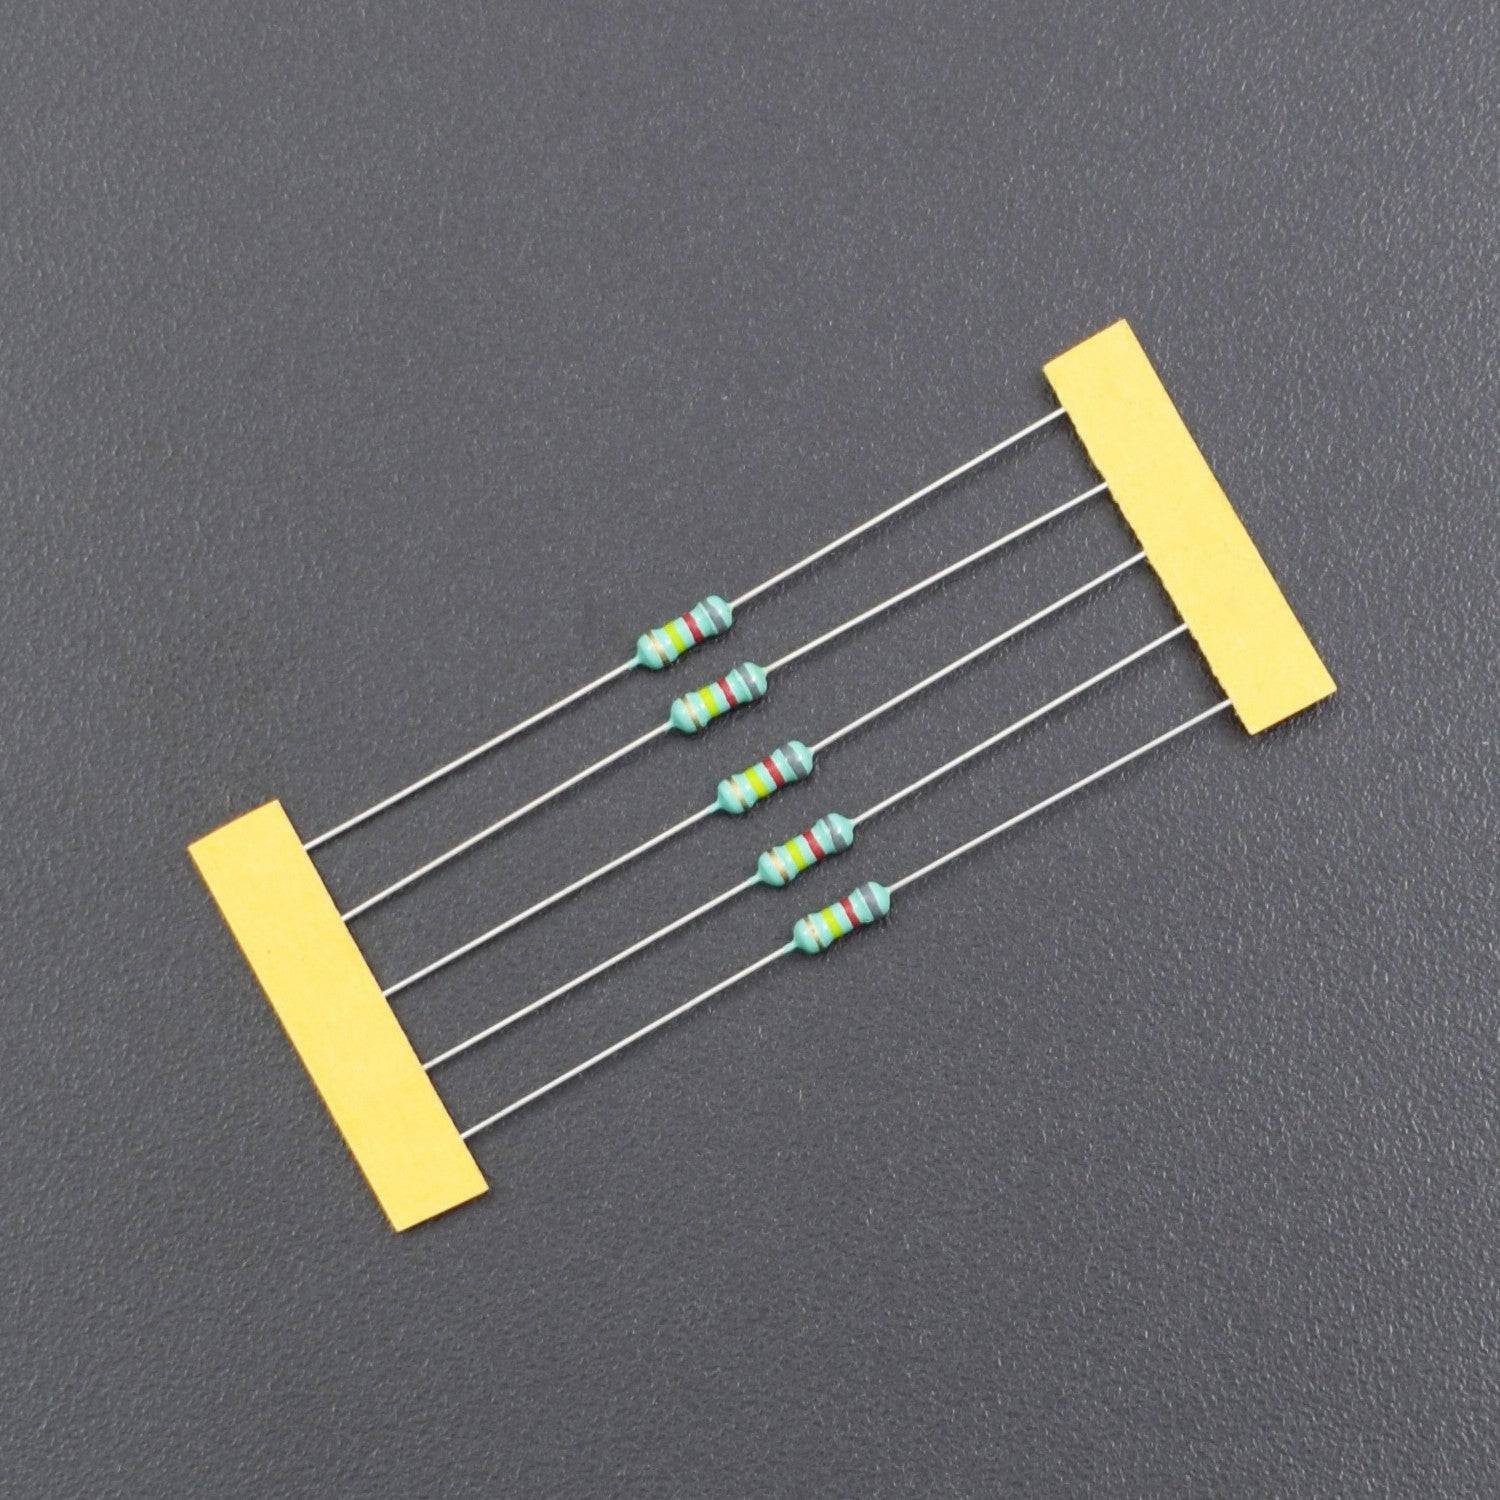 120 Ohm Resistance 1/4W Power Rating  5% Tolerance Carbon Film Resistor-RS892 - REES52